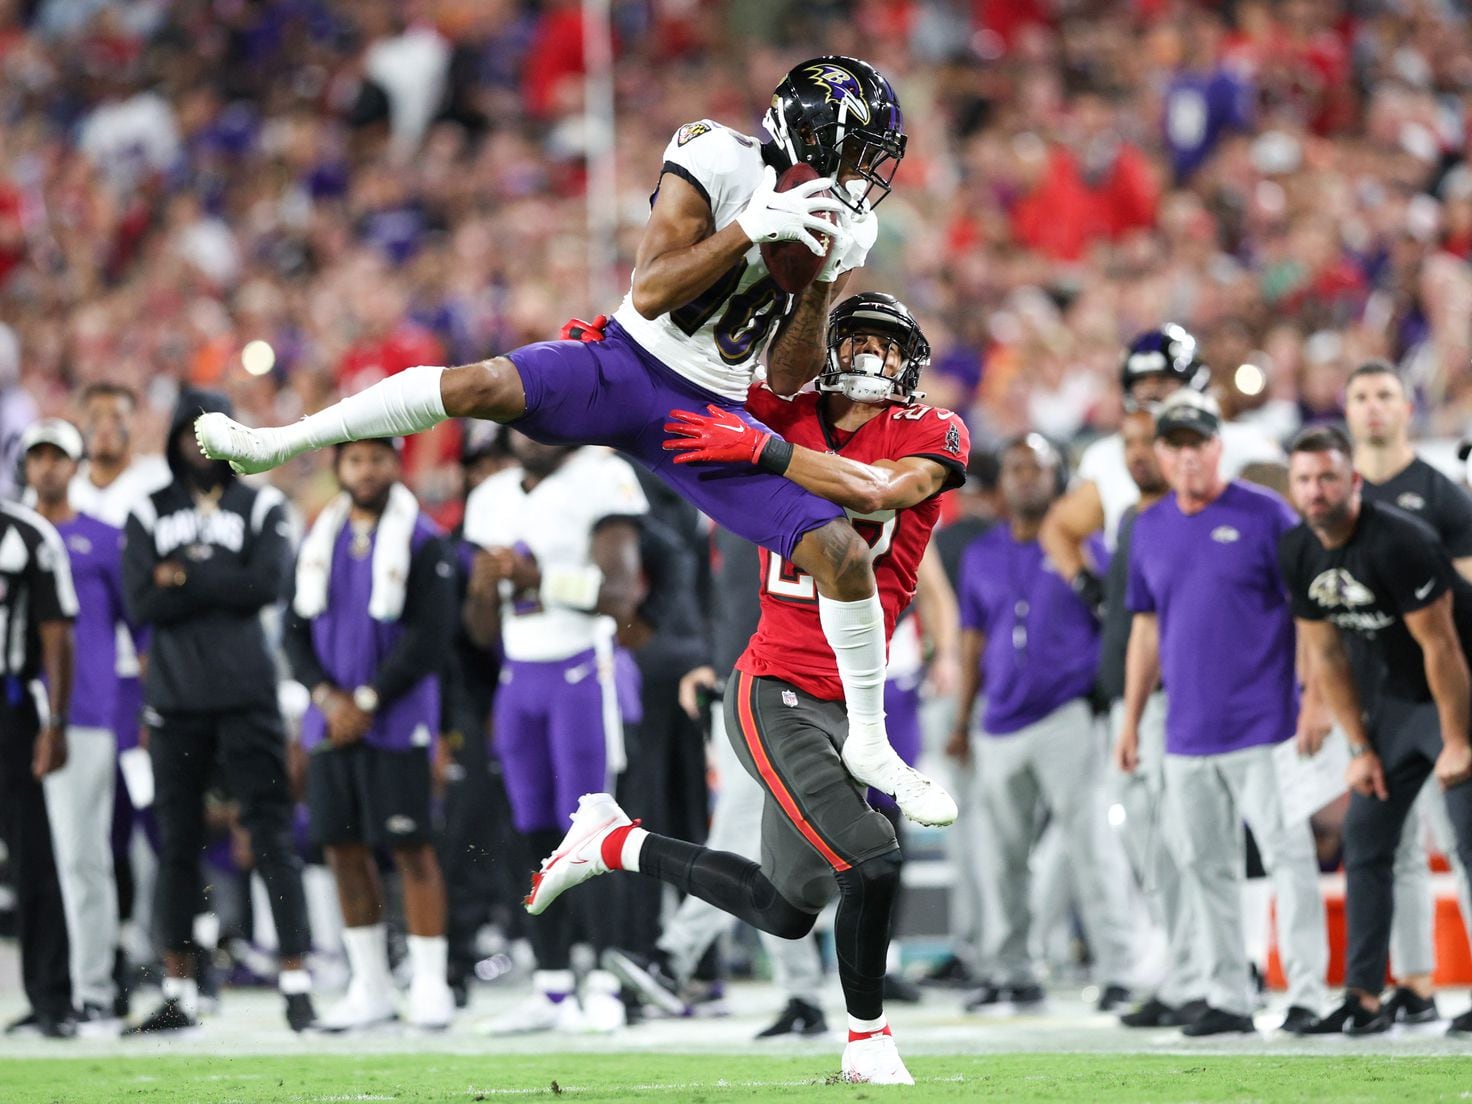 Baltimore Ravens 27 vs 22 Tampa Bay Buccaneers summary: stats and